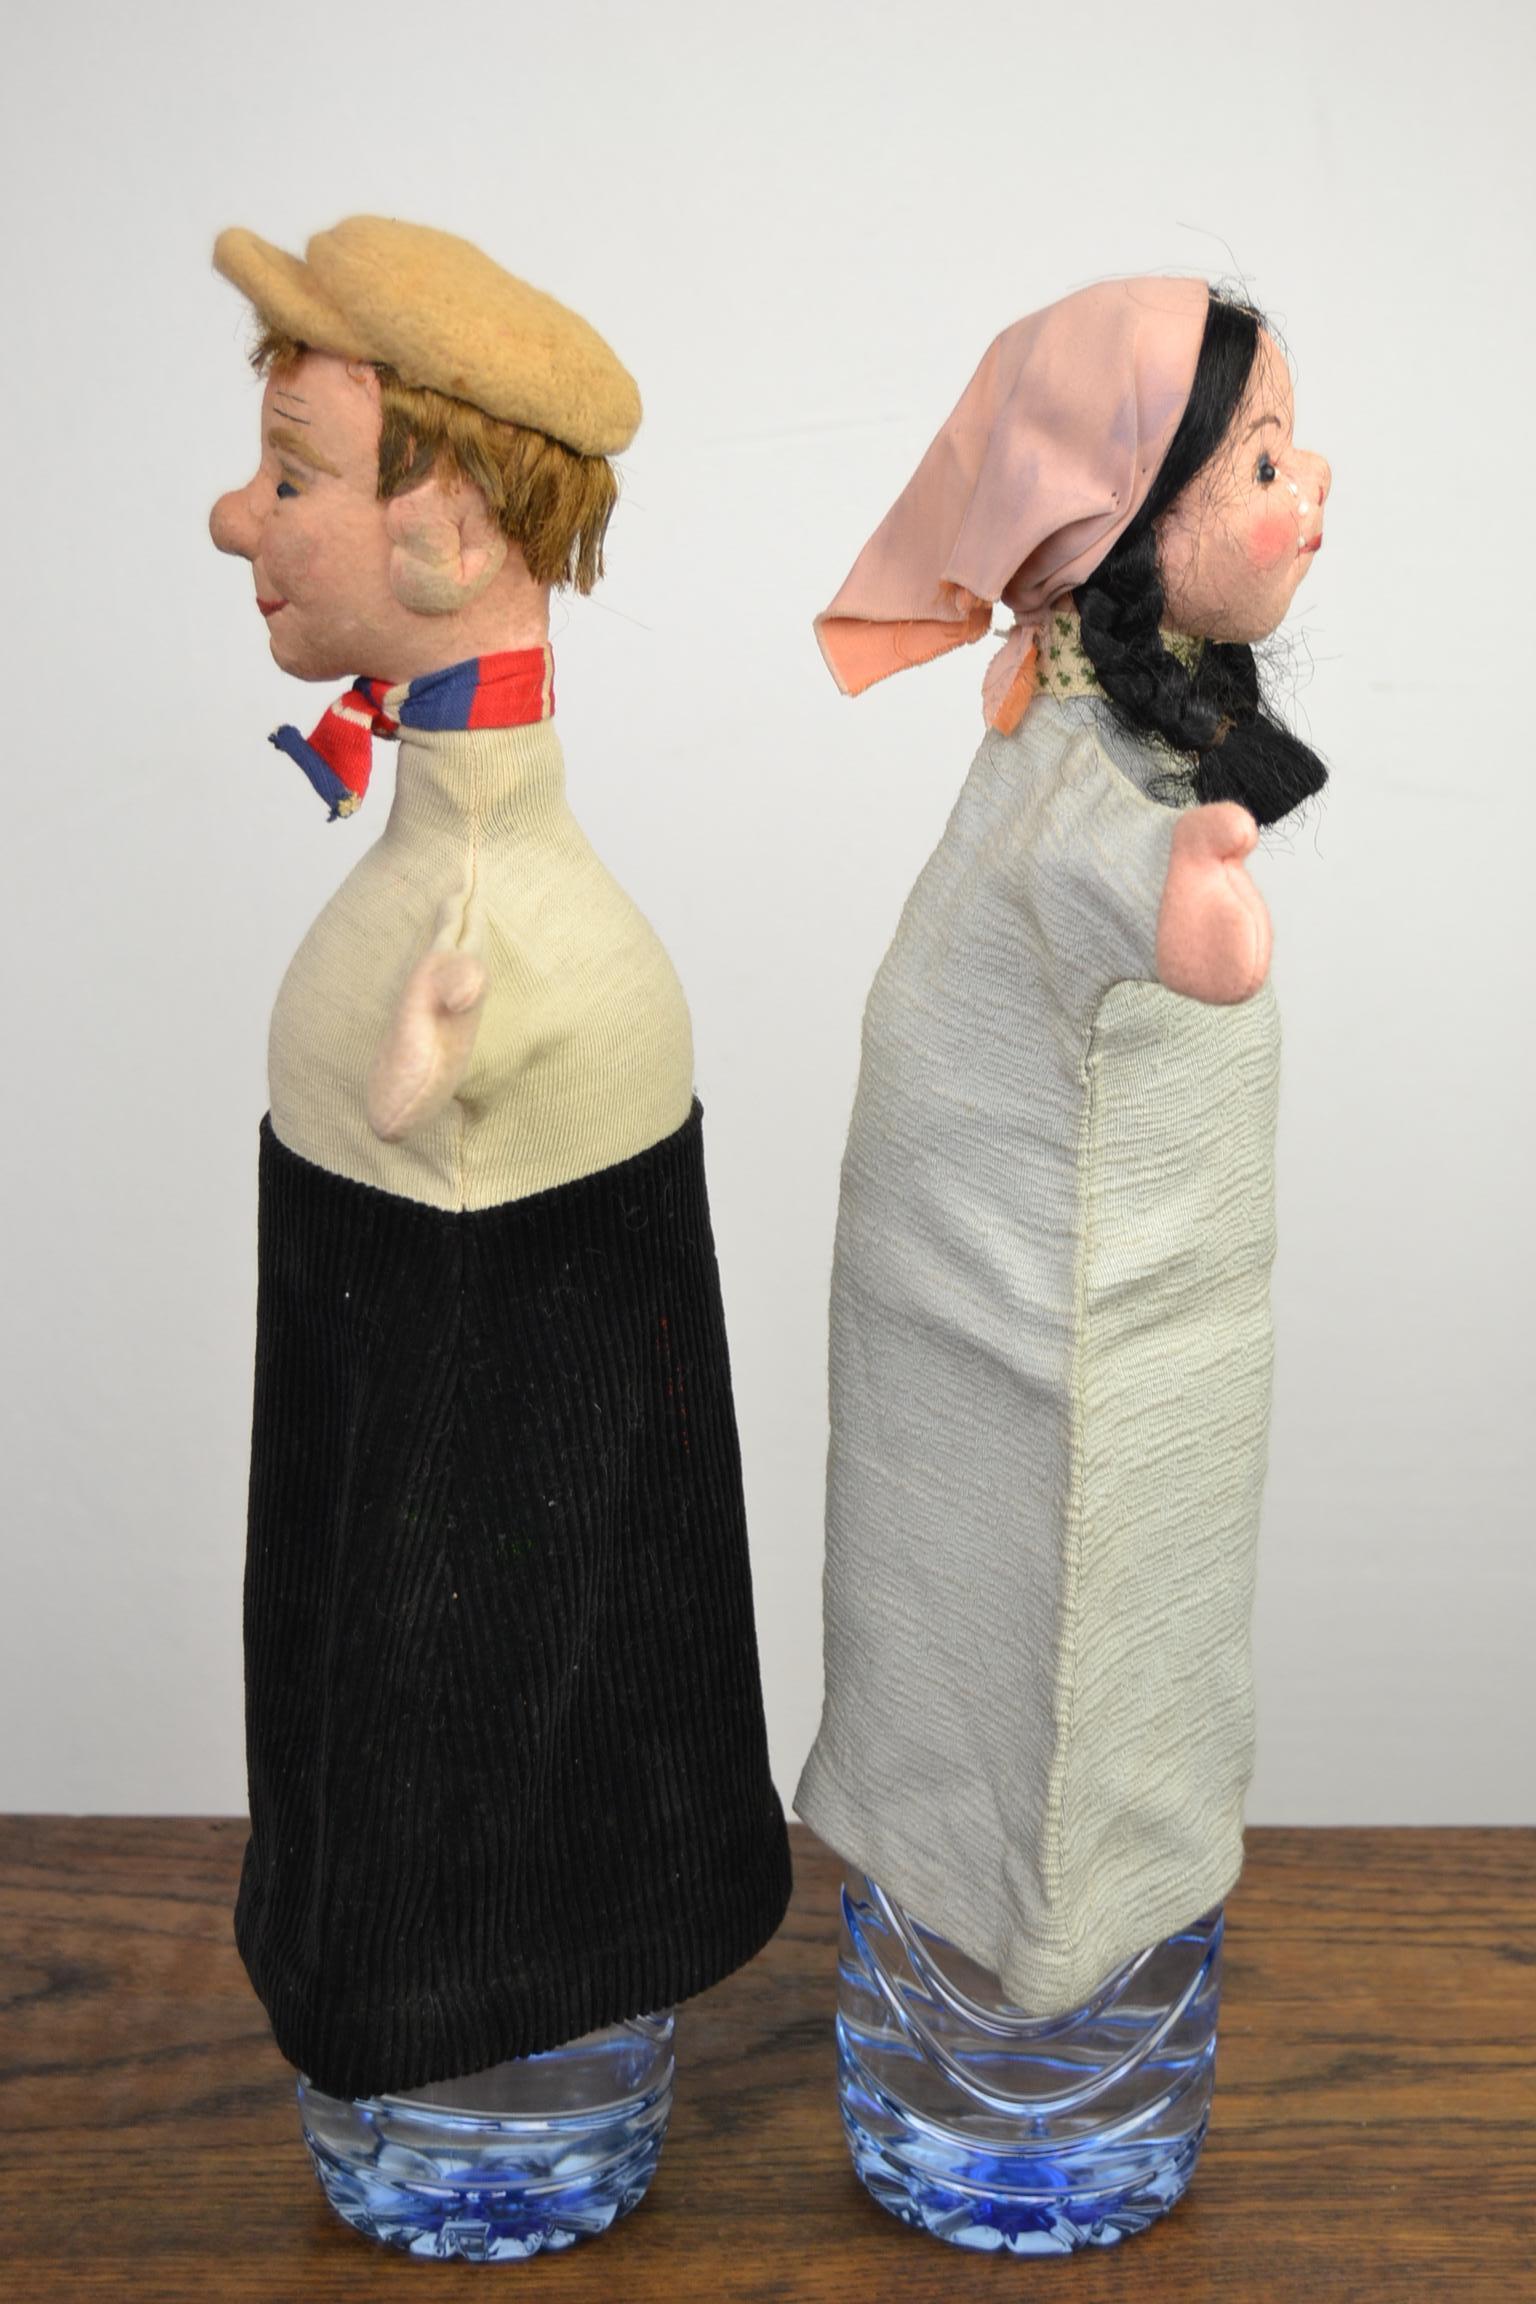 20th Century Vintage Hand Puppet Dolls, Marionette Dolls, Germany, 1950s